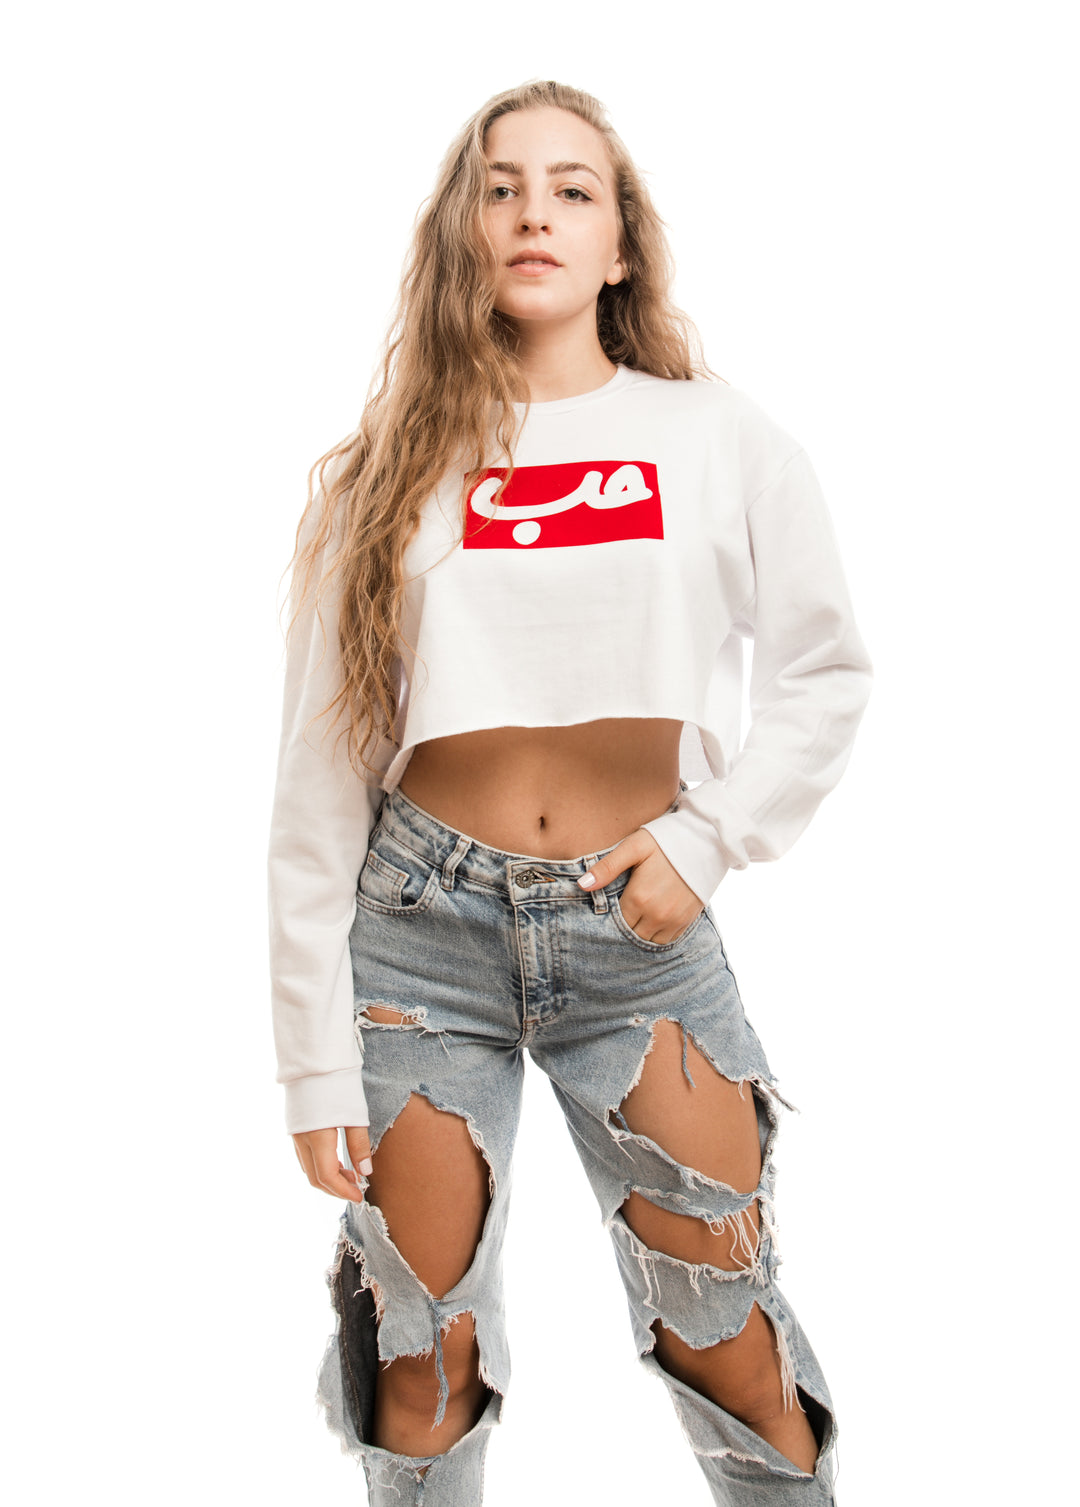 Young adult female wearing white Crop Sweater with Hobb written in Arabic حب in white and printed in a red velvet frame in the center of the Crop Sweater along with teared jeans.